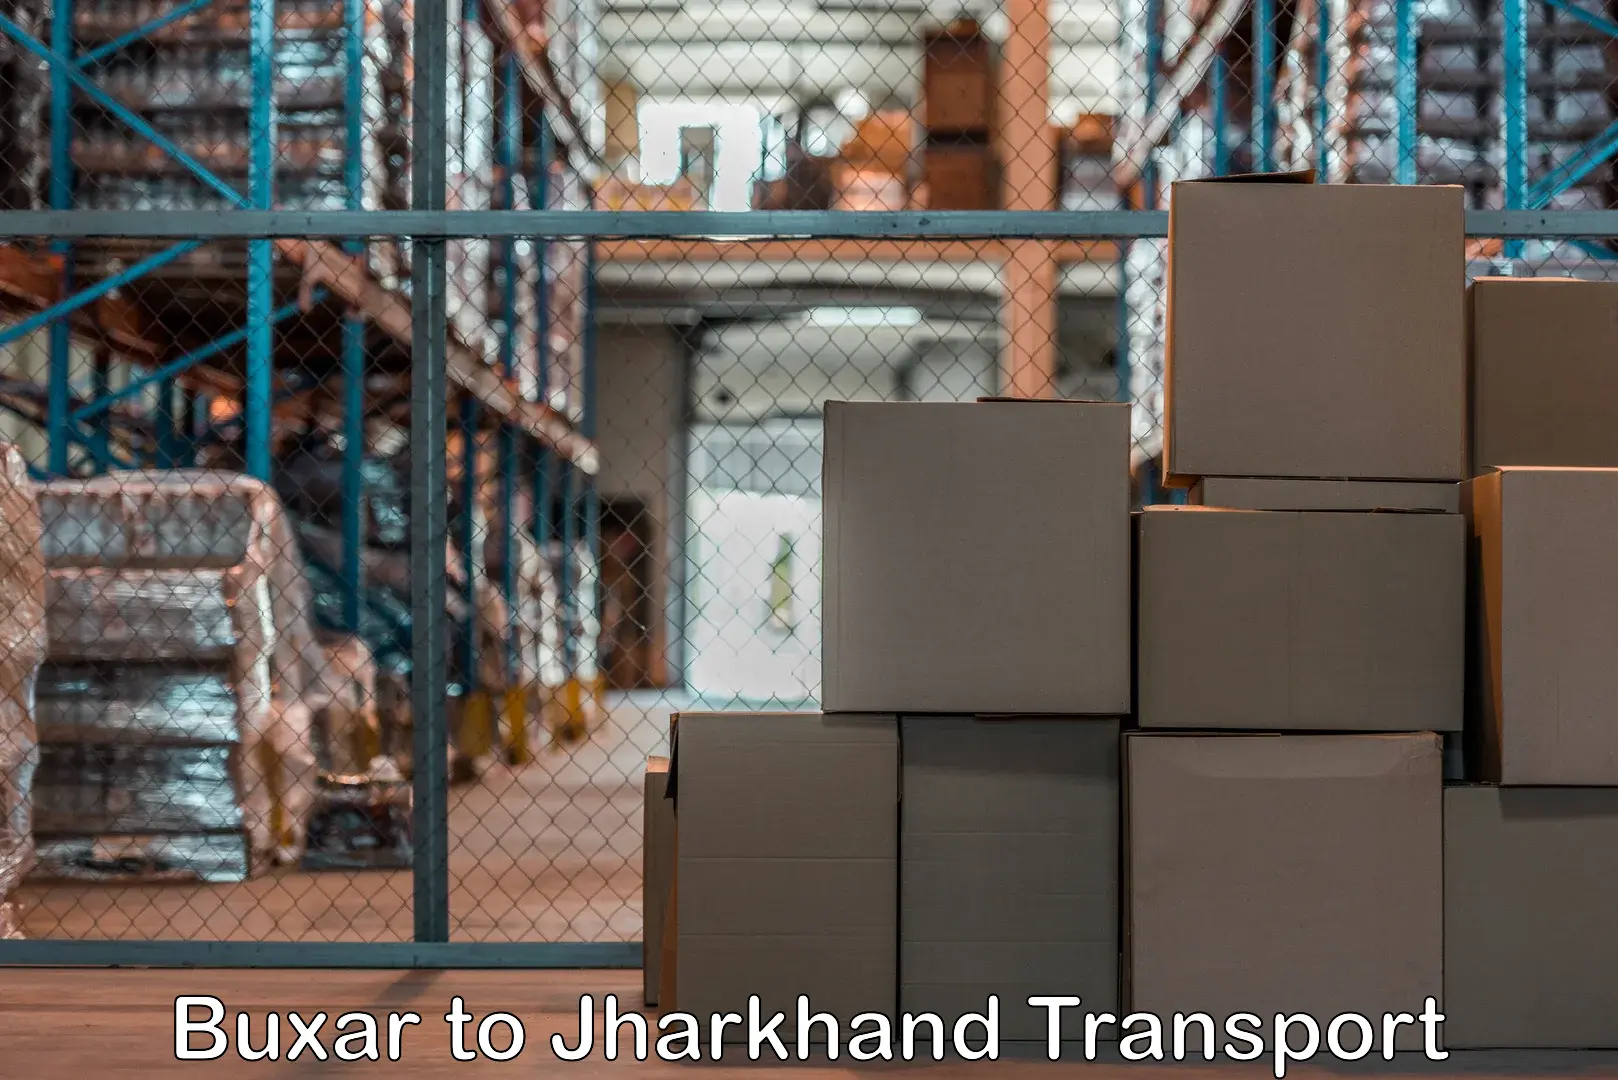 Pick up transport service Buxar to Jharkhand